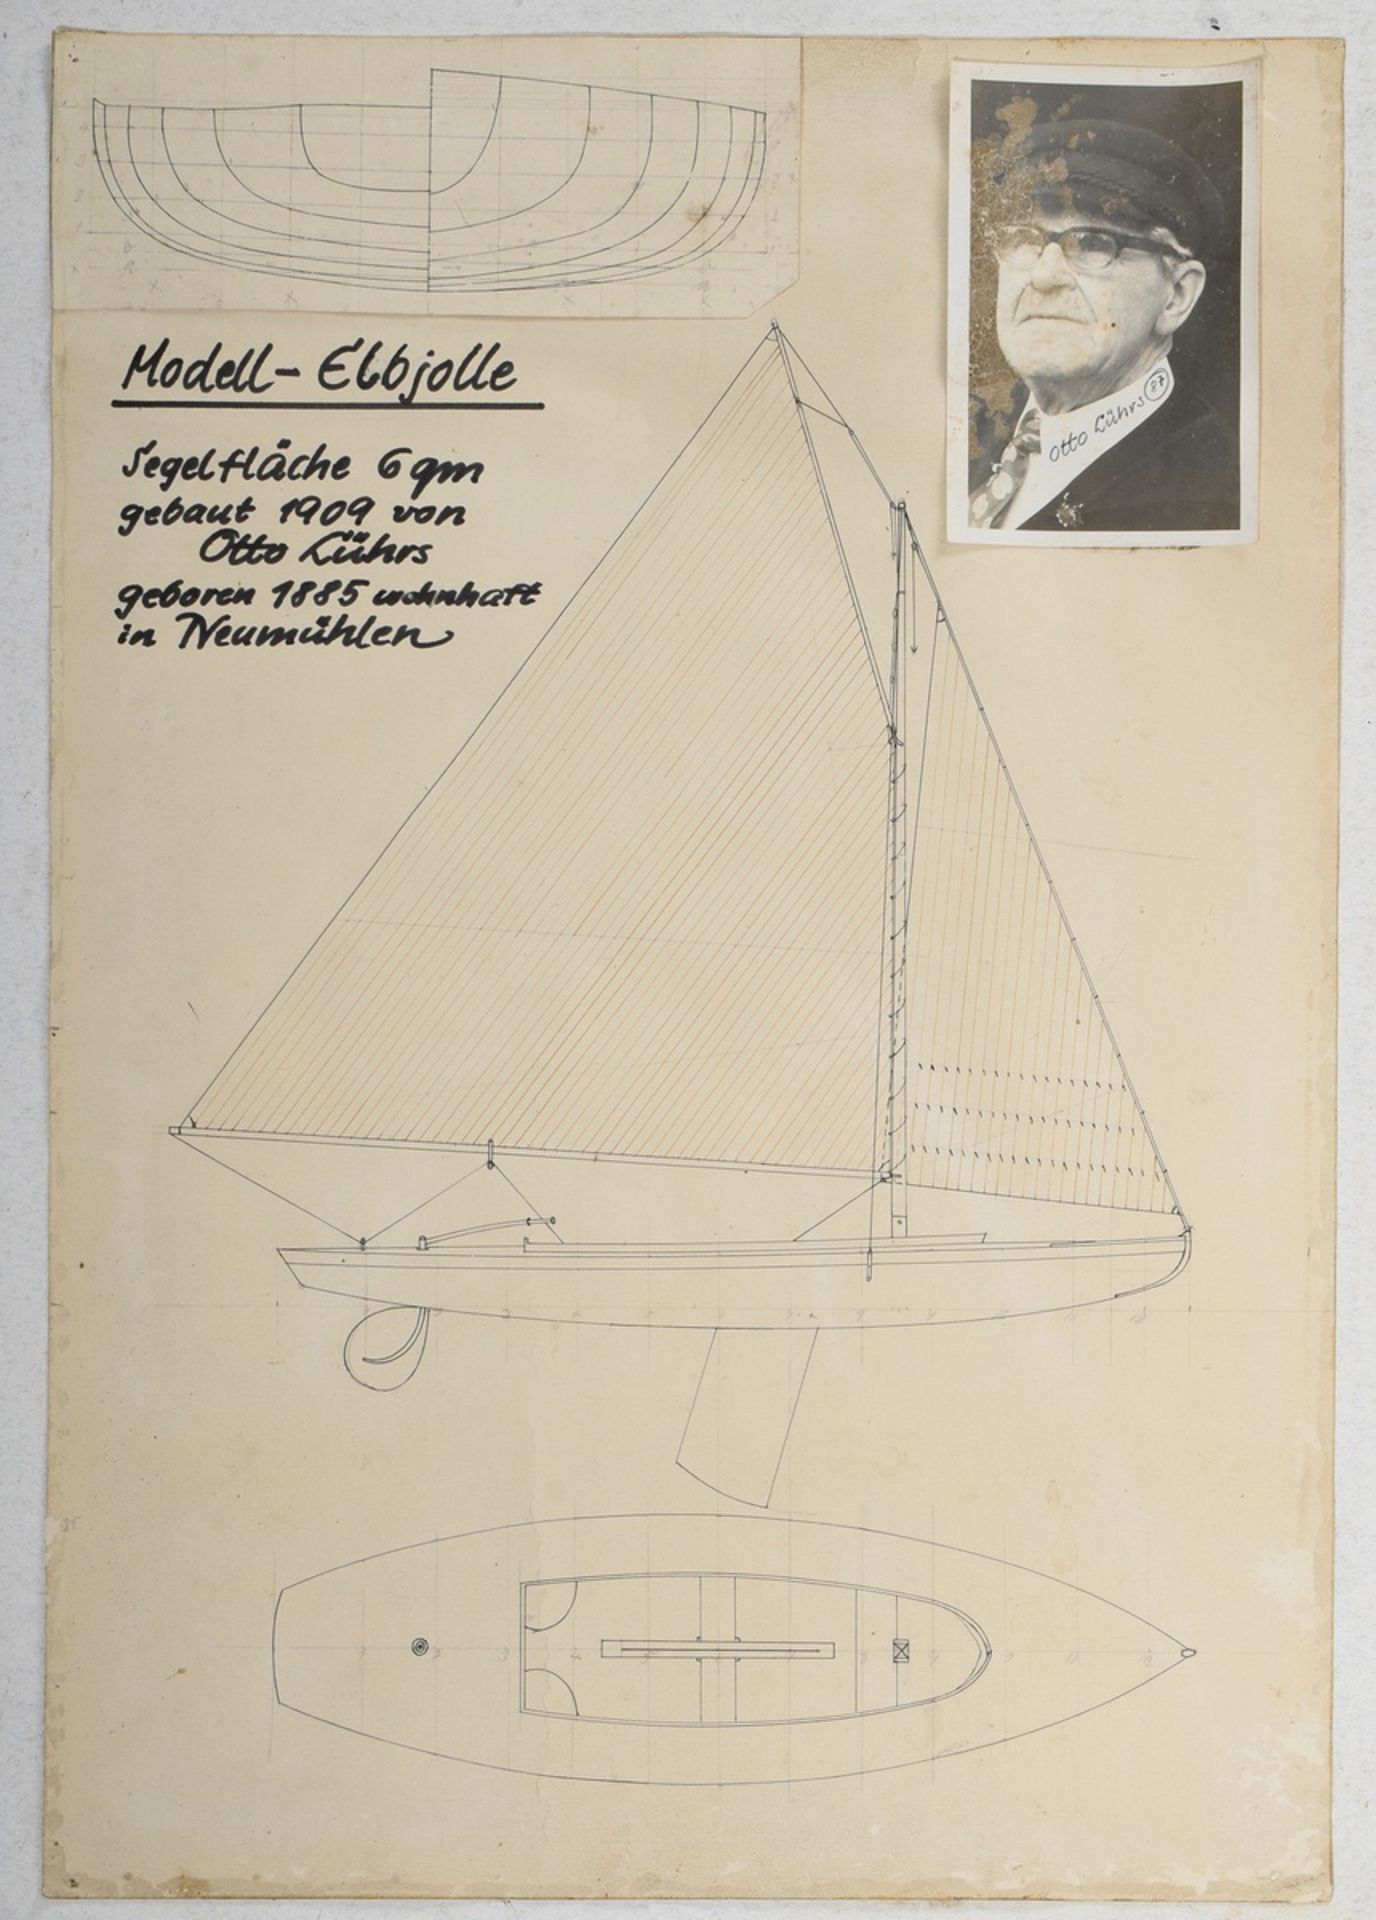 Model "Elbjolle", wood, built by Otto Lührs 1909, l. approx. 262cm, mast, boom and sails missing, s - Image 2 of 9